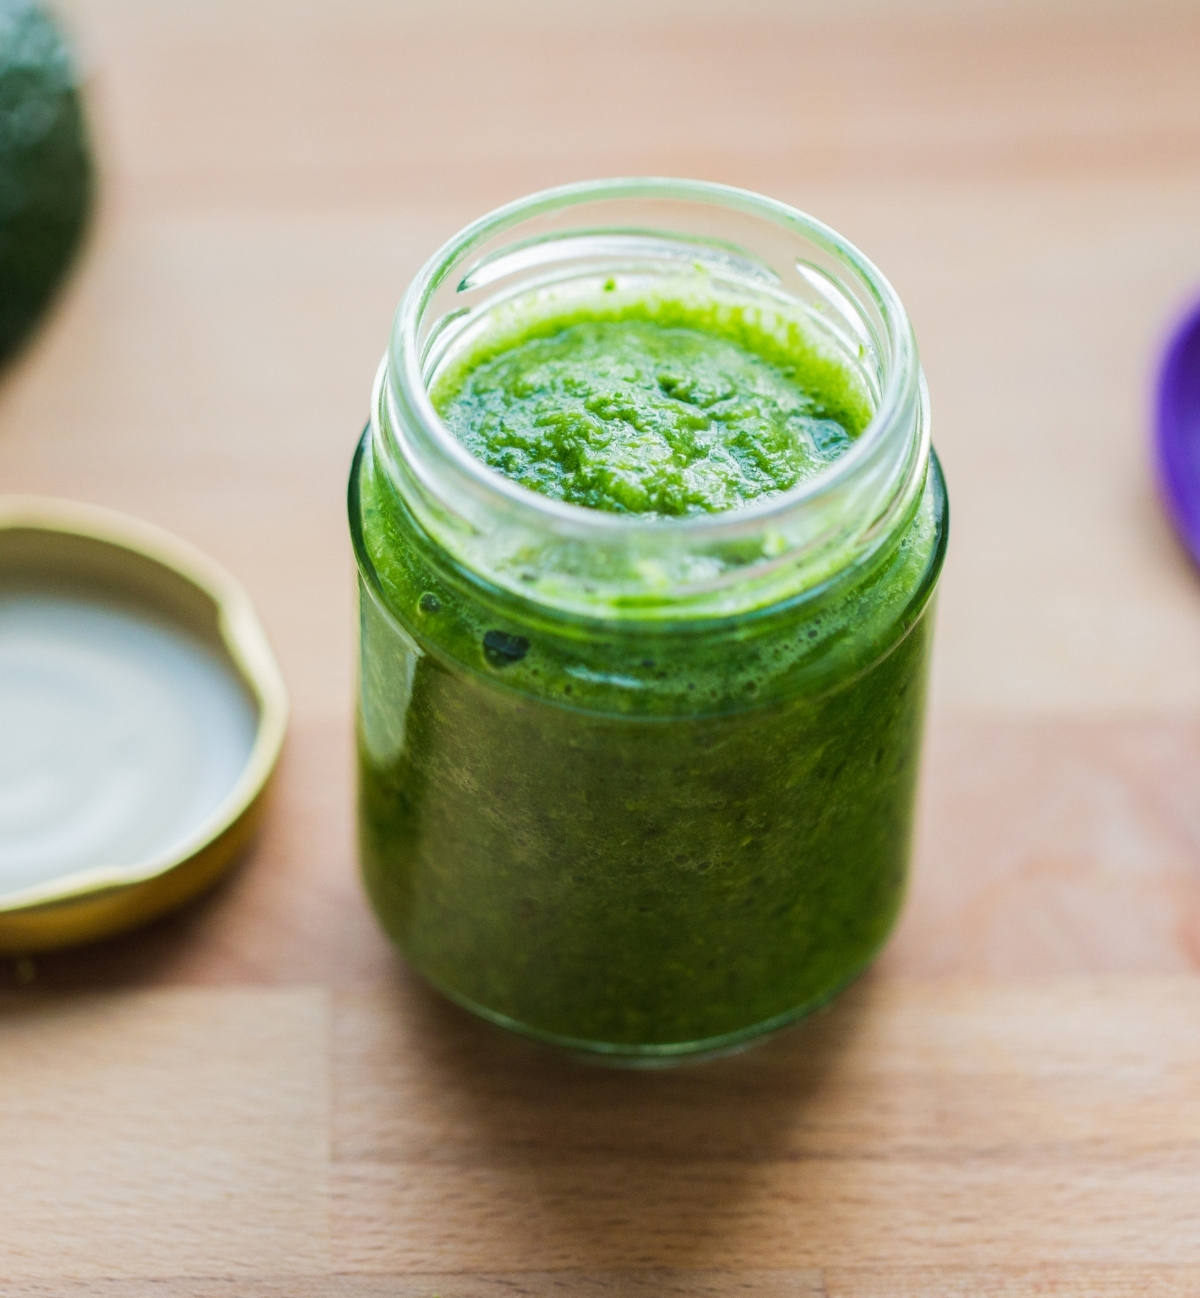 Broccoli puree for baby in a jar.